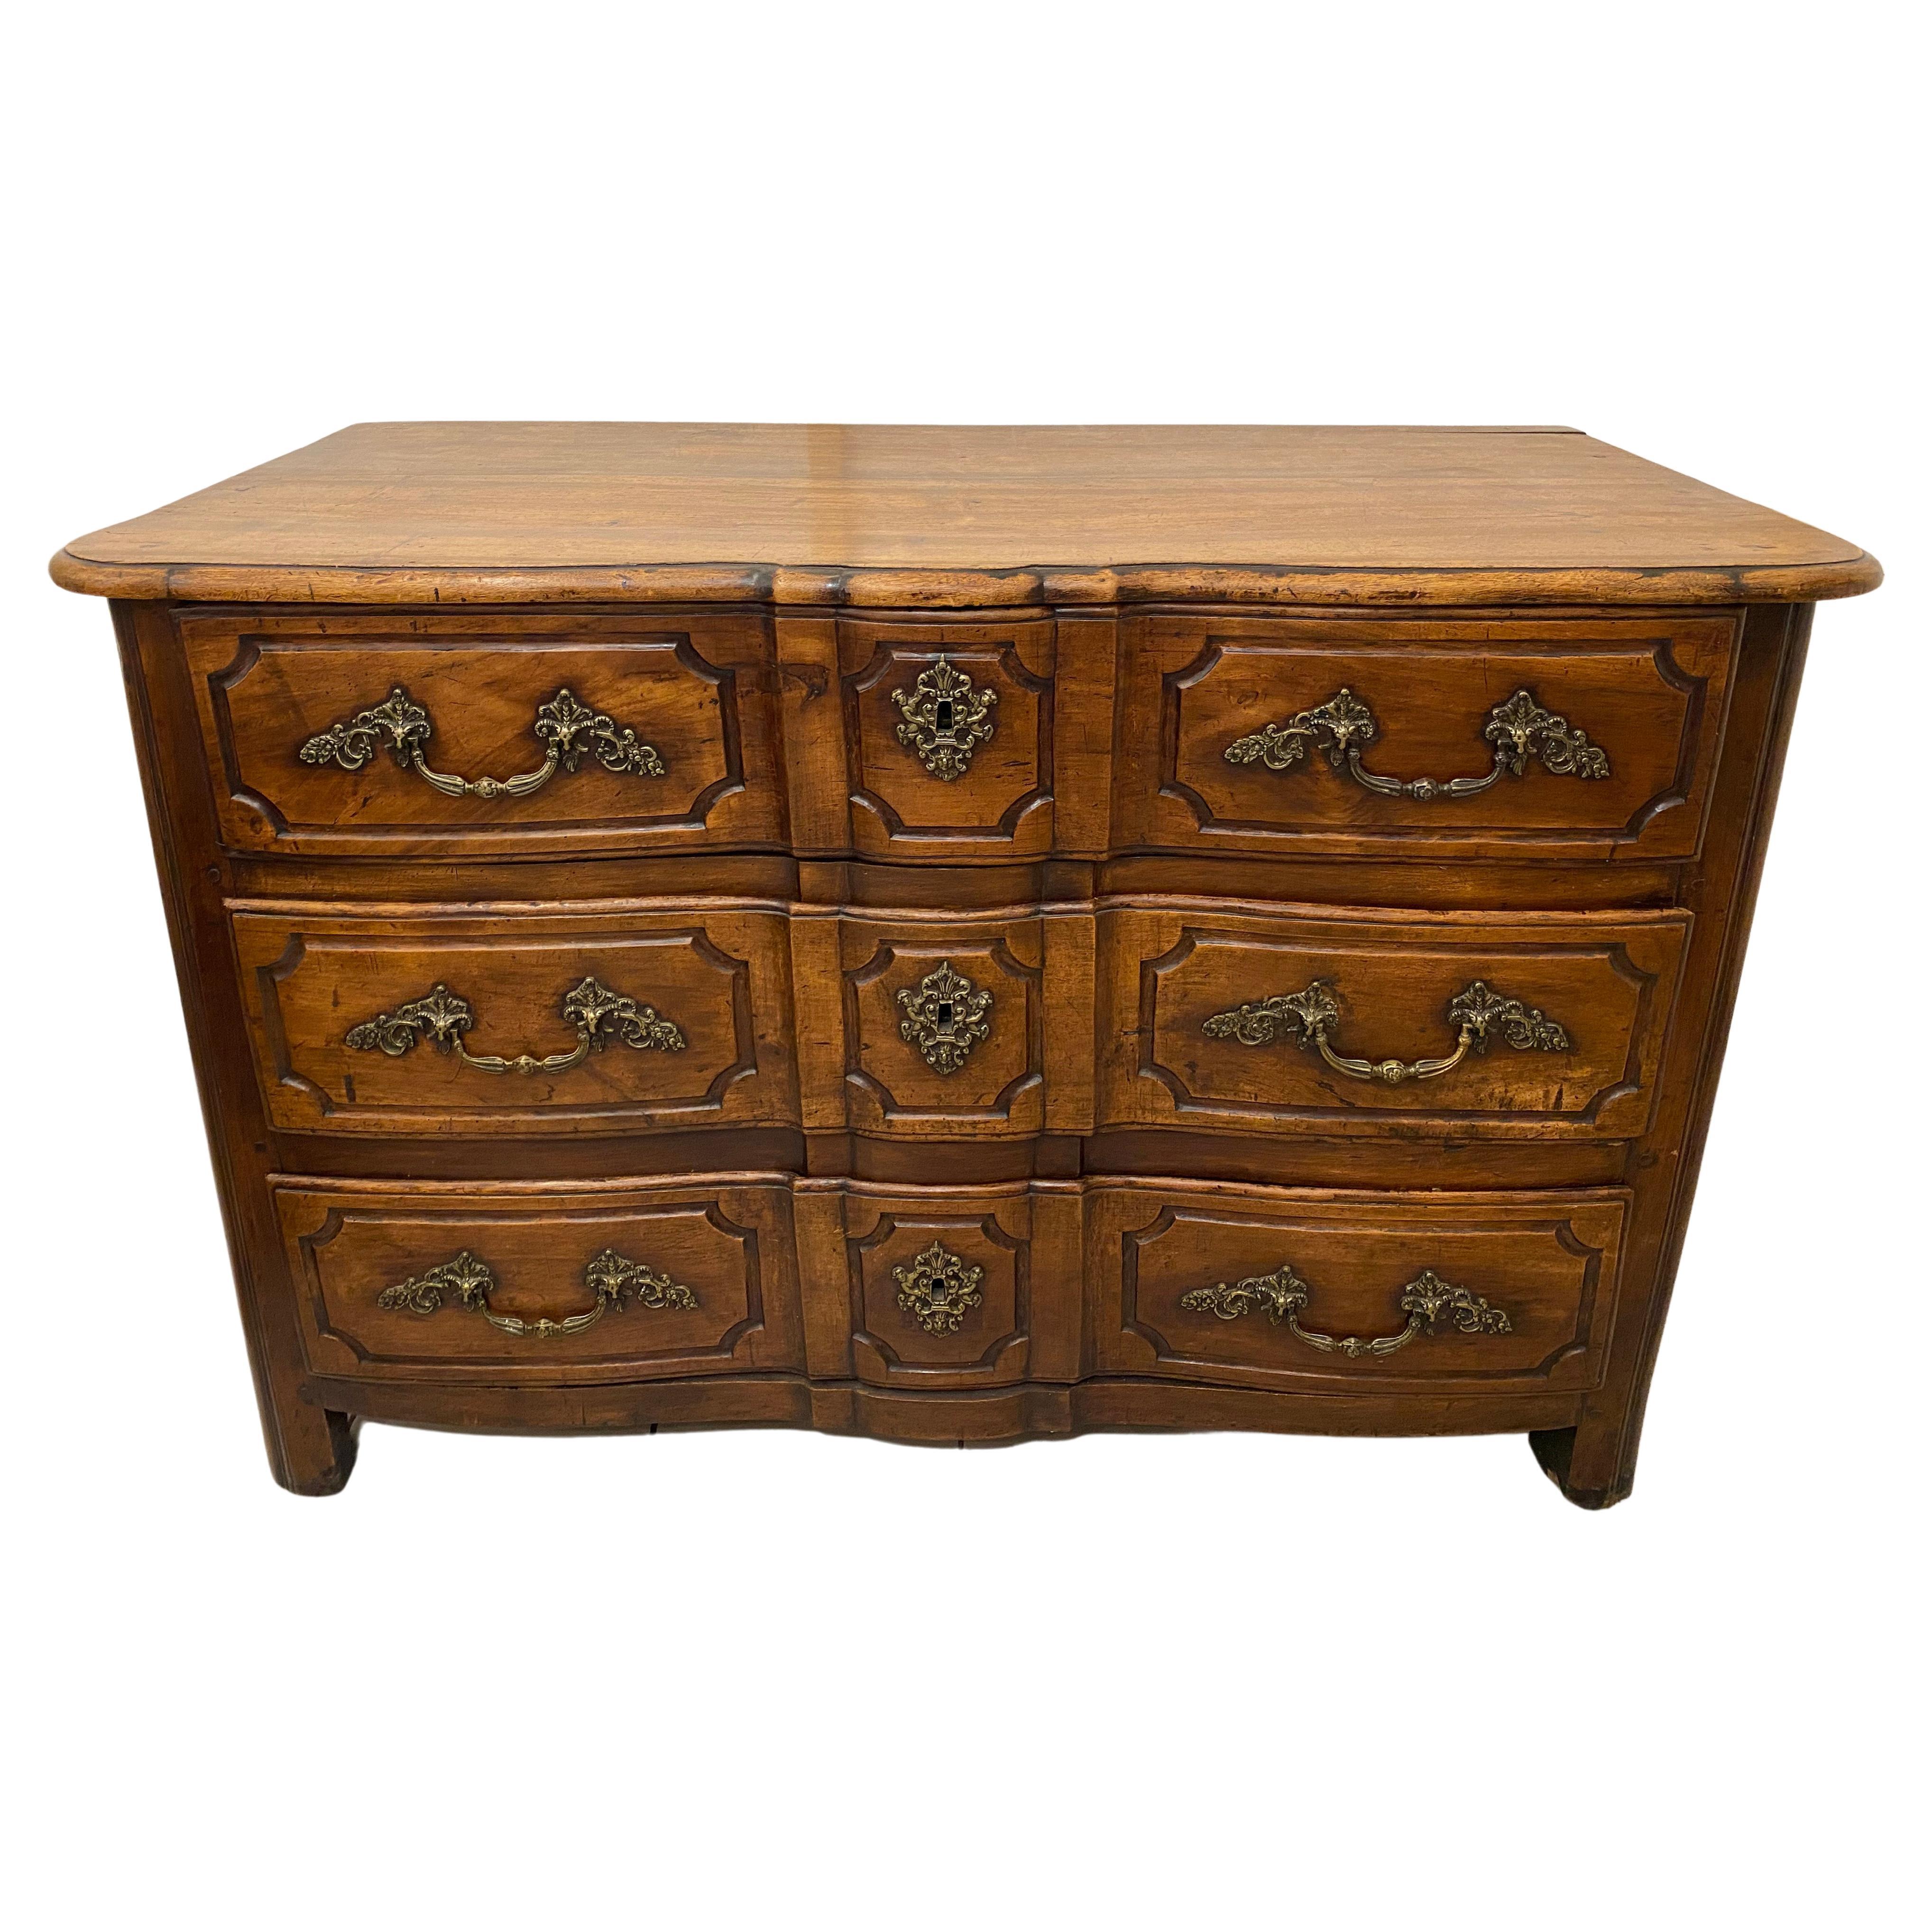 Period Chest of Drawers, Late 18th Century 